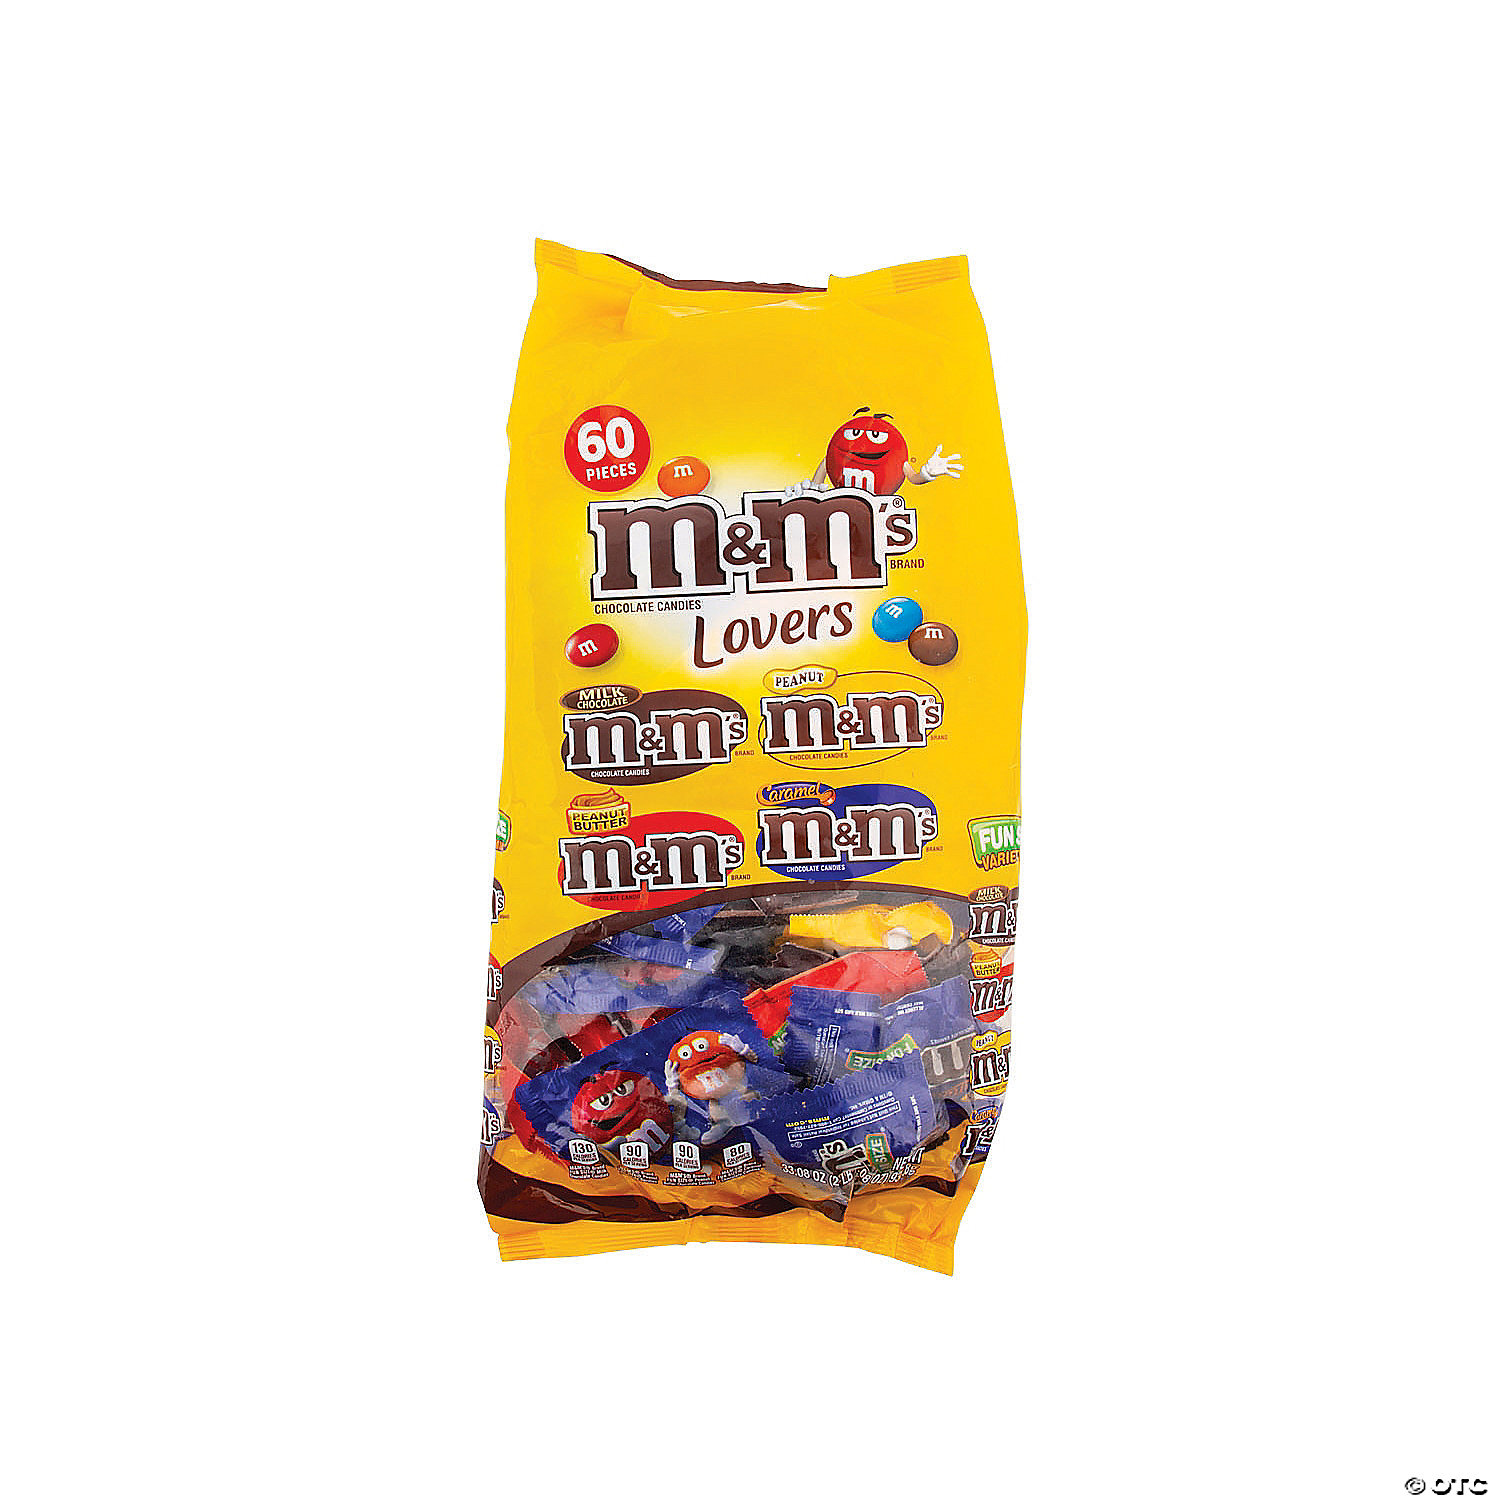 M&M's Chocolate Candies Fun Size Variety Mix - 60 CT, Packaged Candy